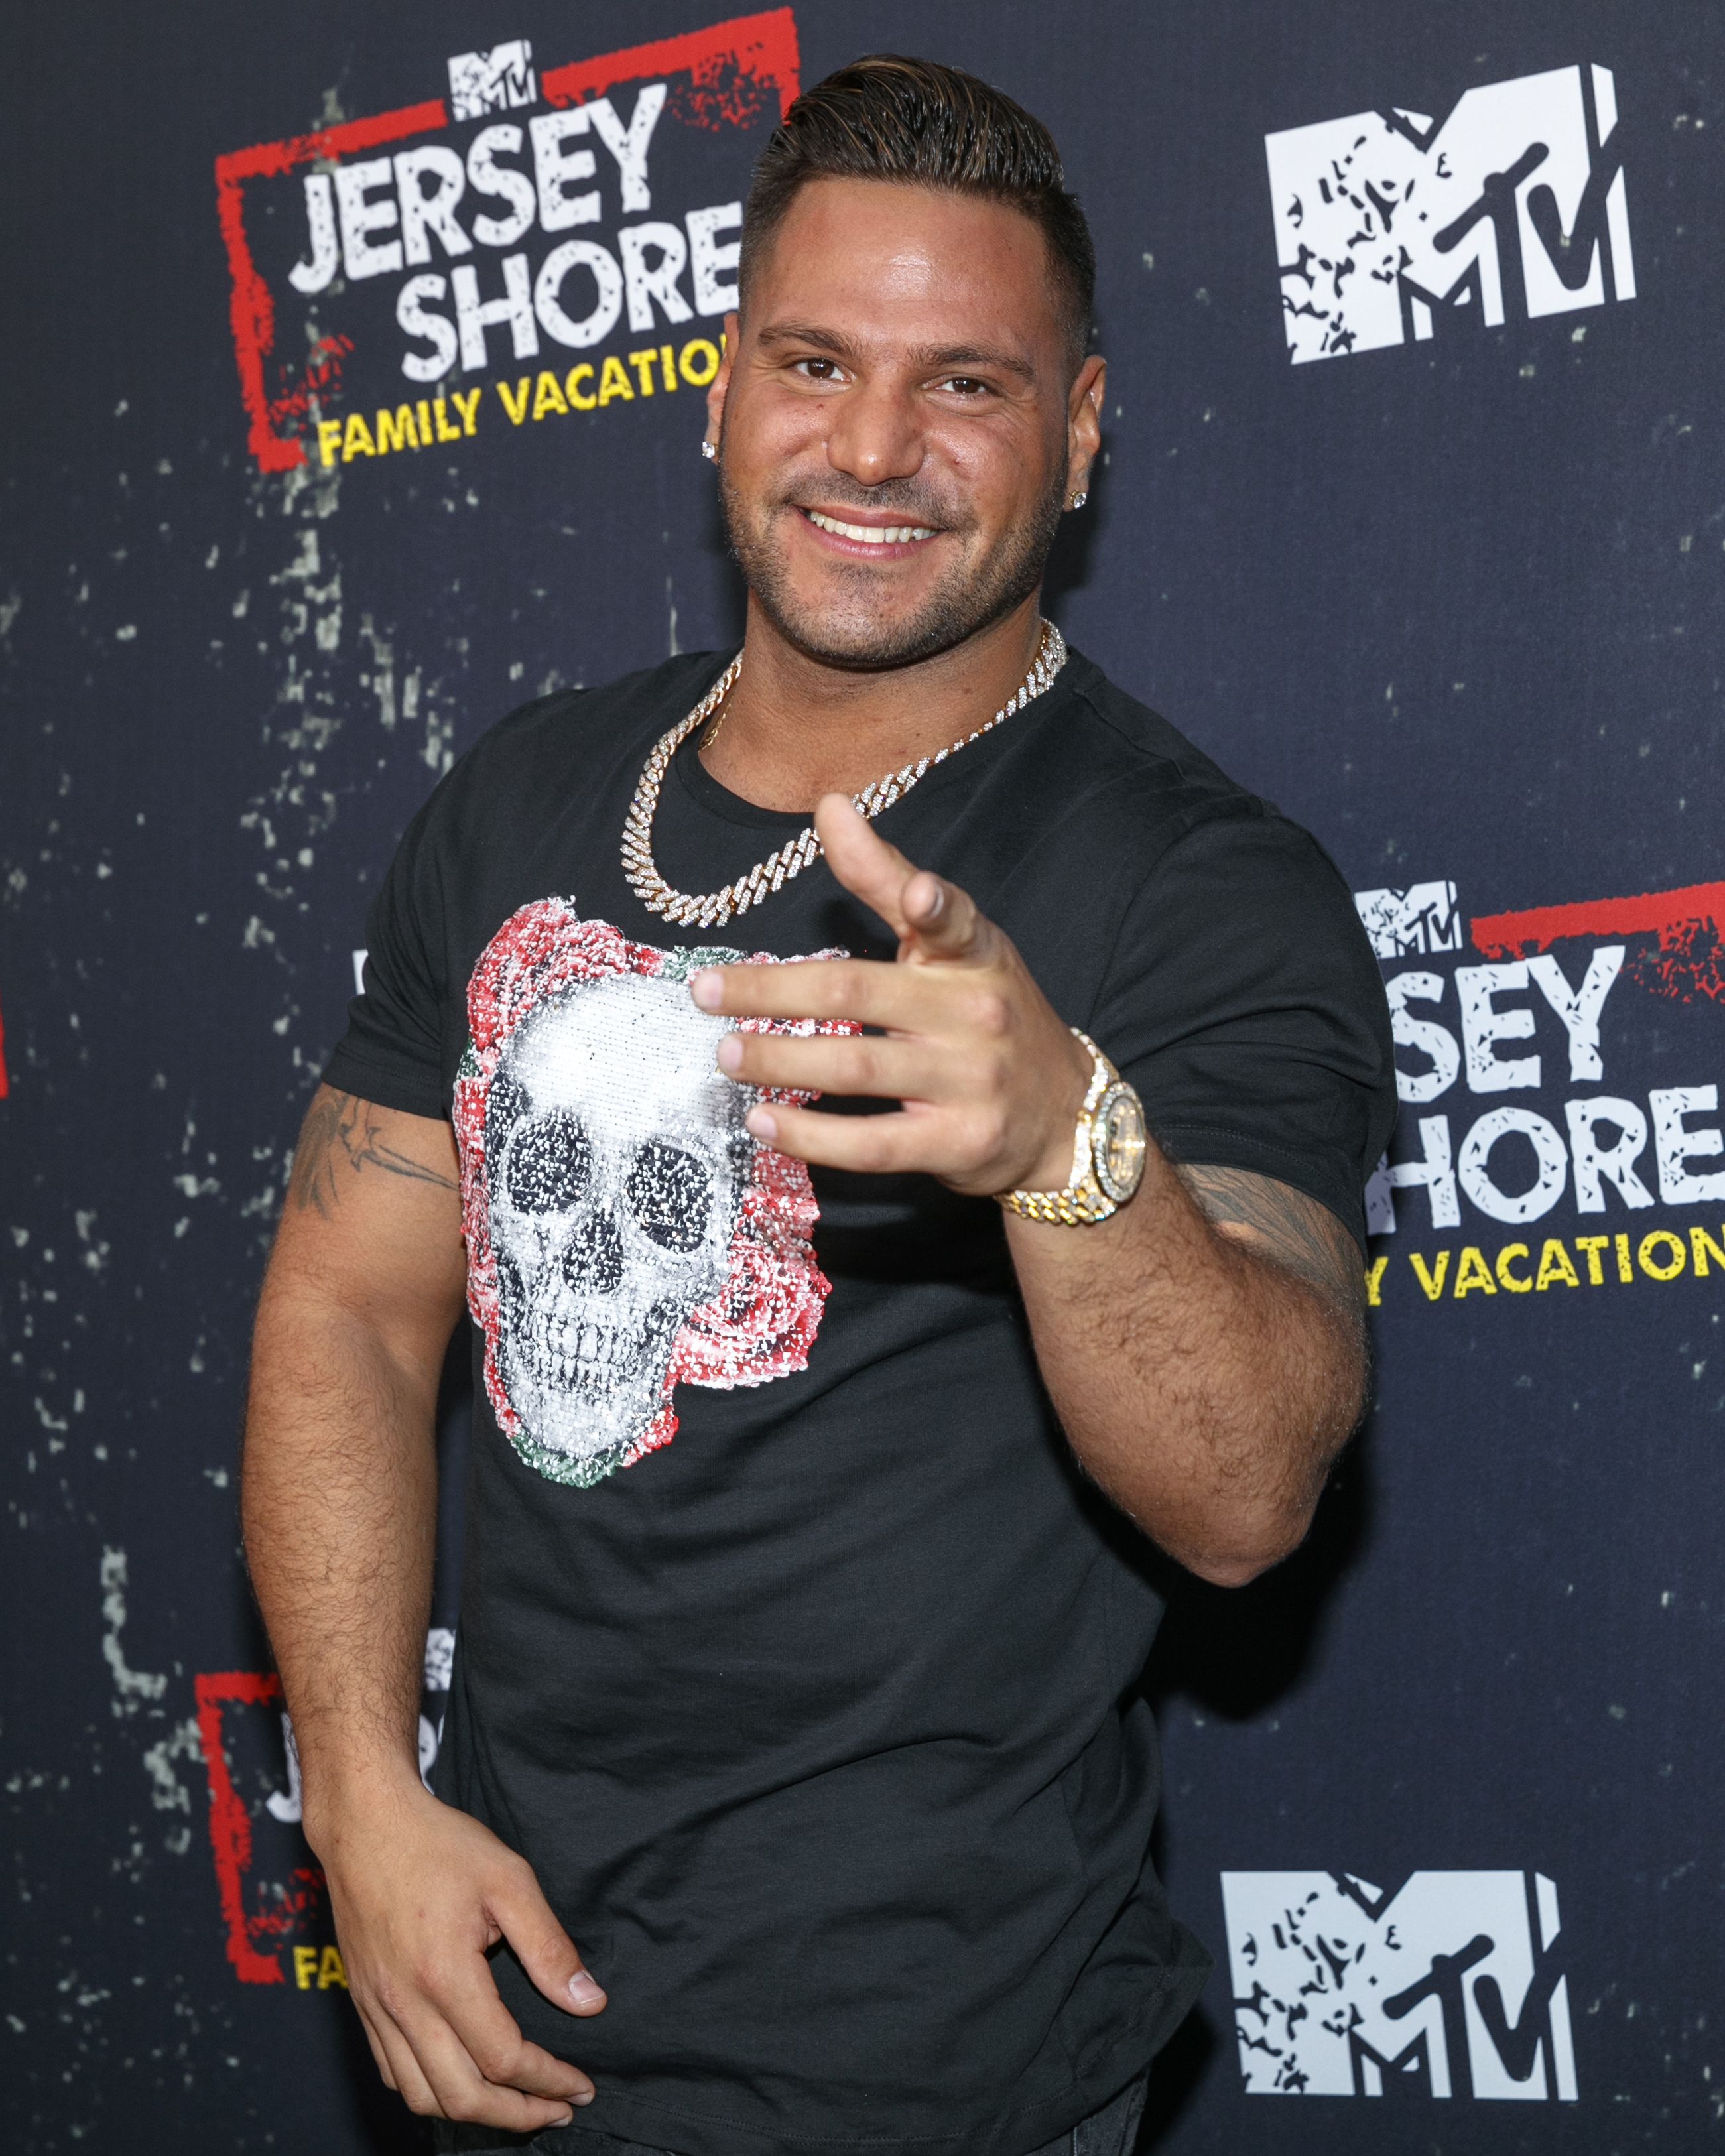 ronnie mtv jersey shore